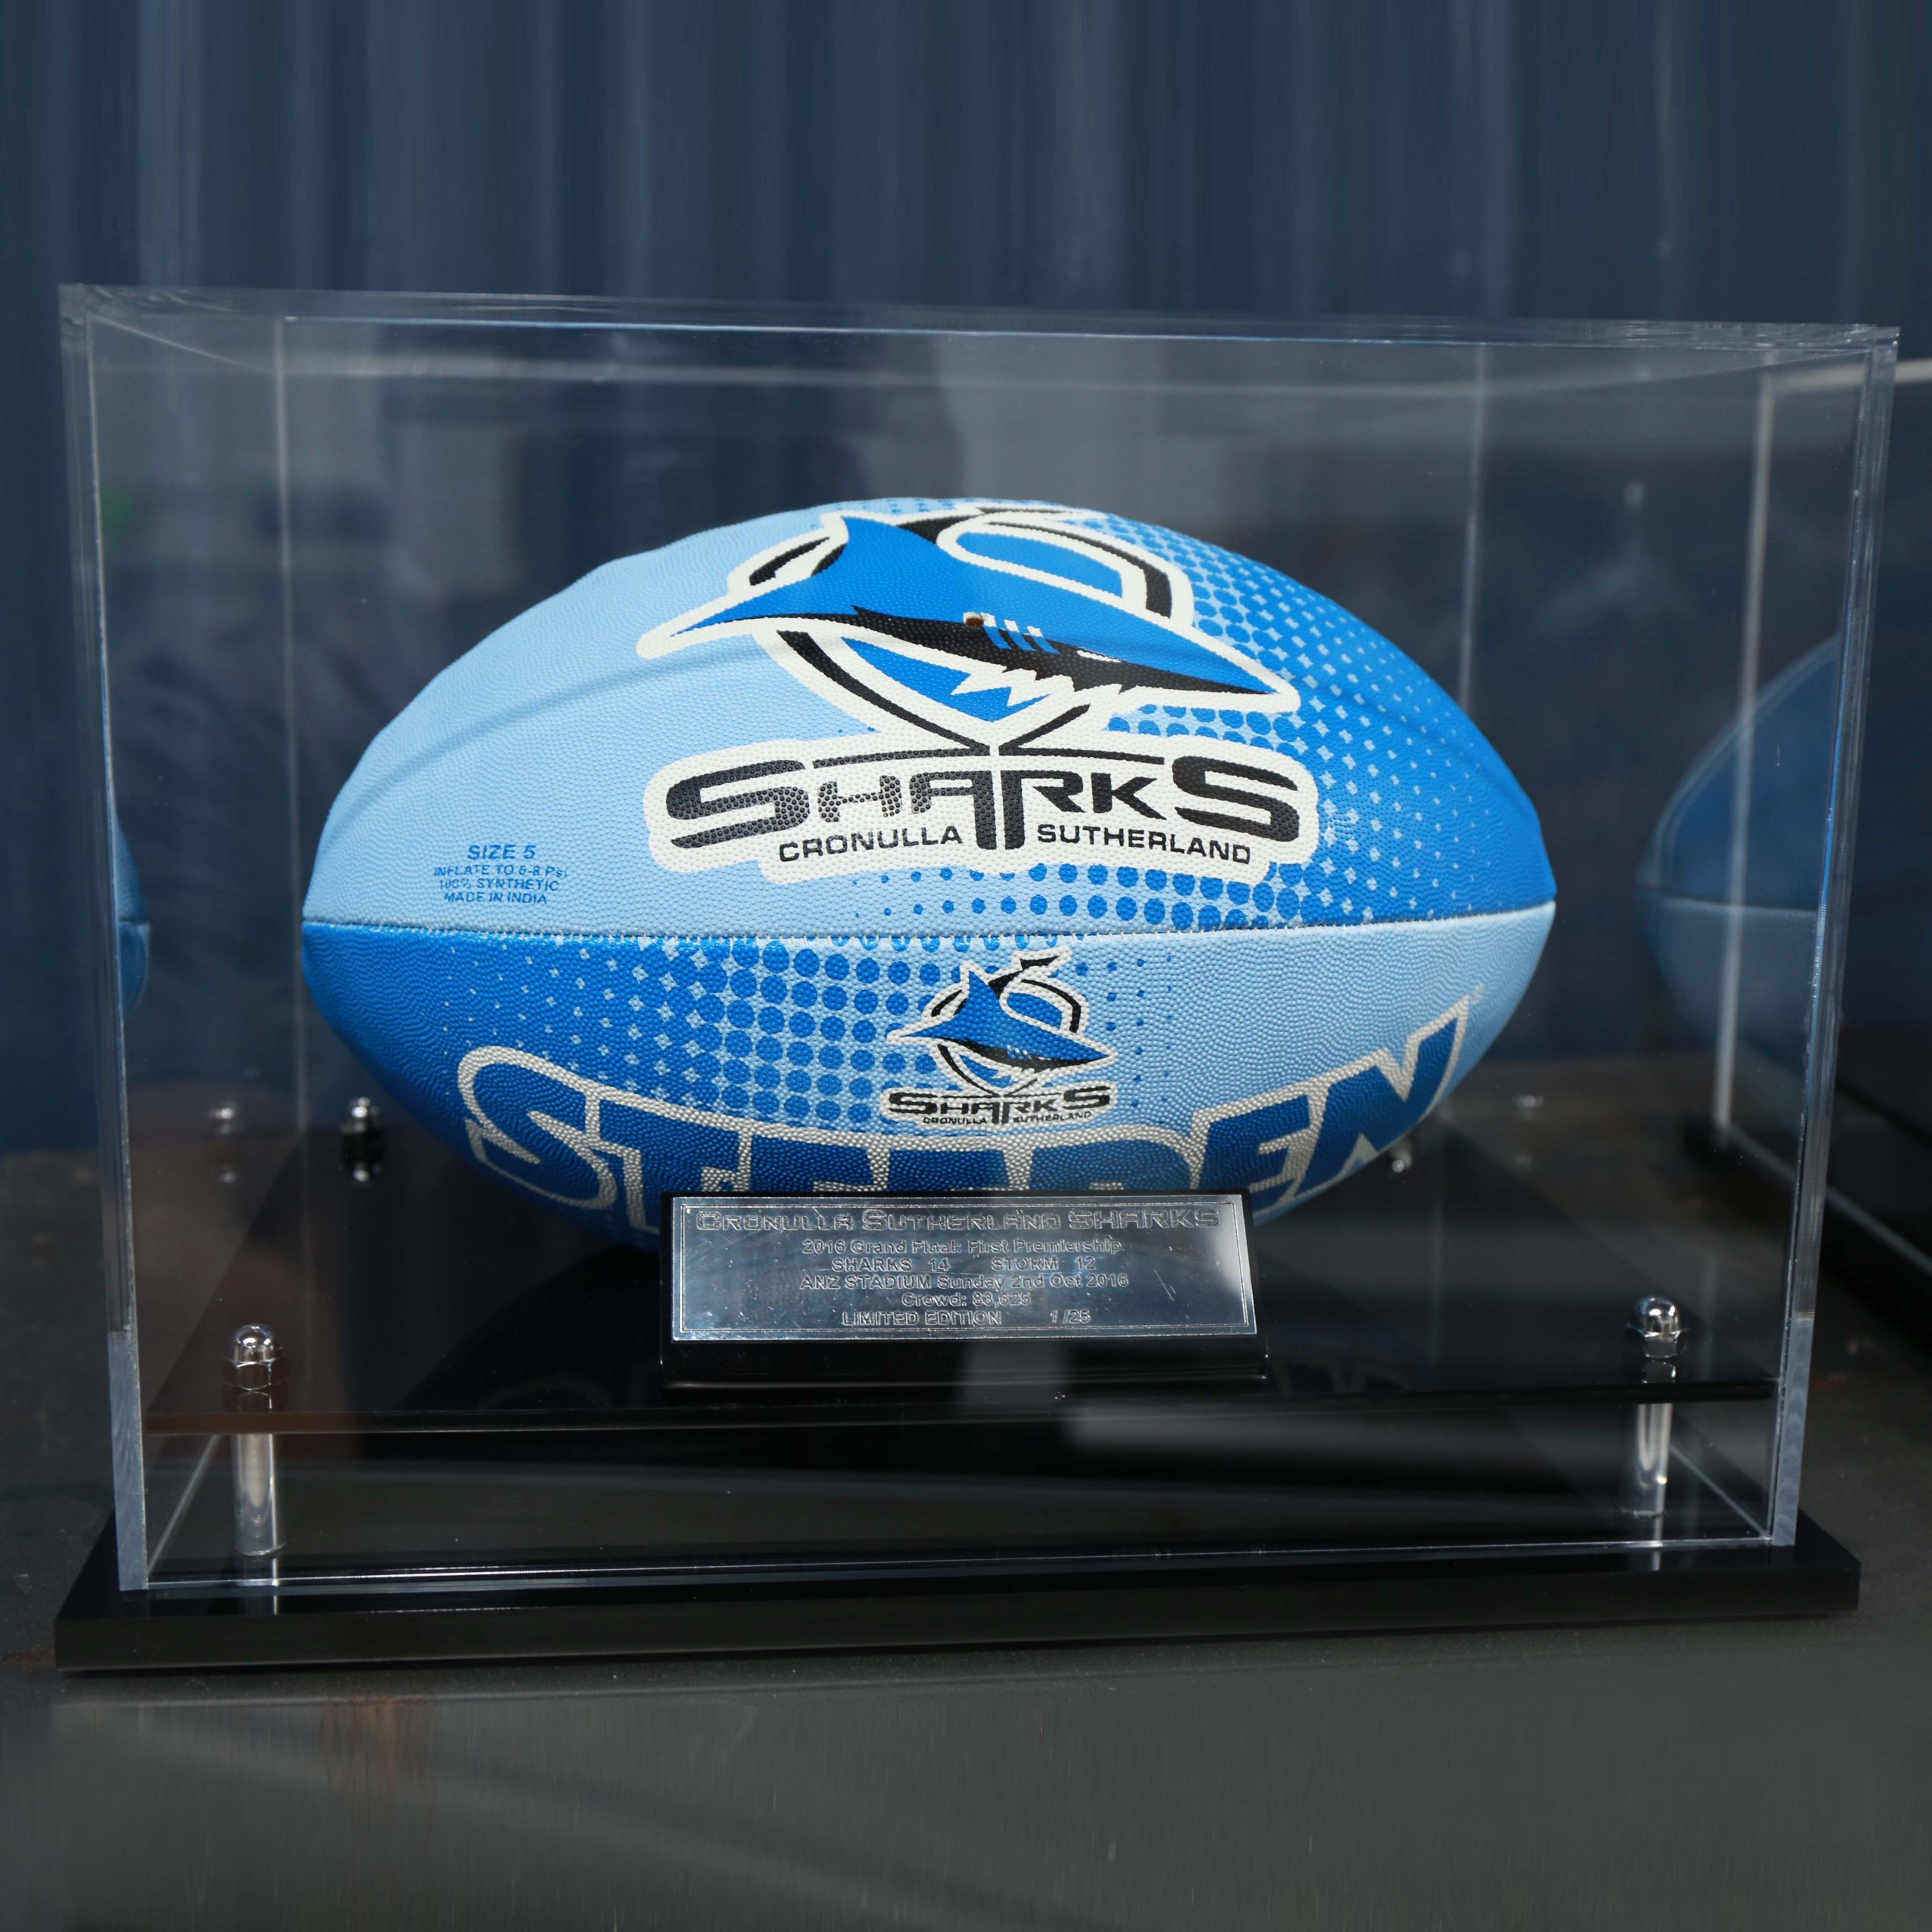 Cronulla Sharks 2016 Rugby League Ball Acrylic Display Case. Designed to showcase and protect your NRL ball.